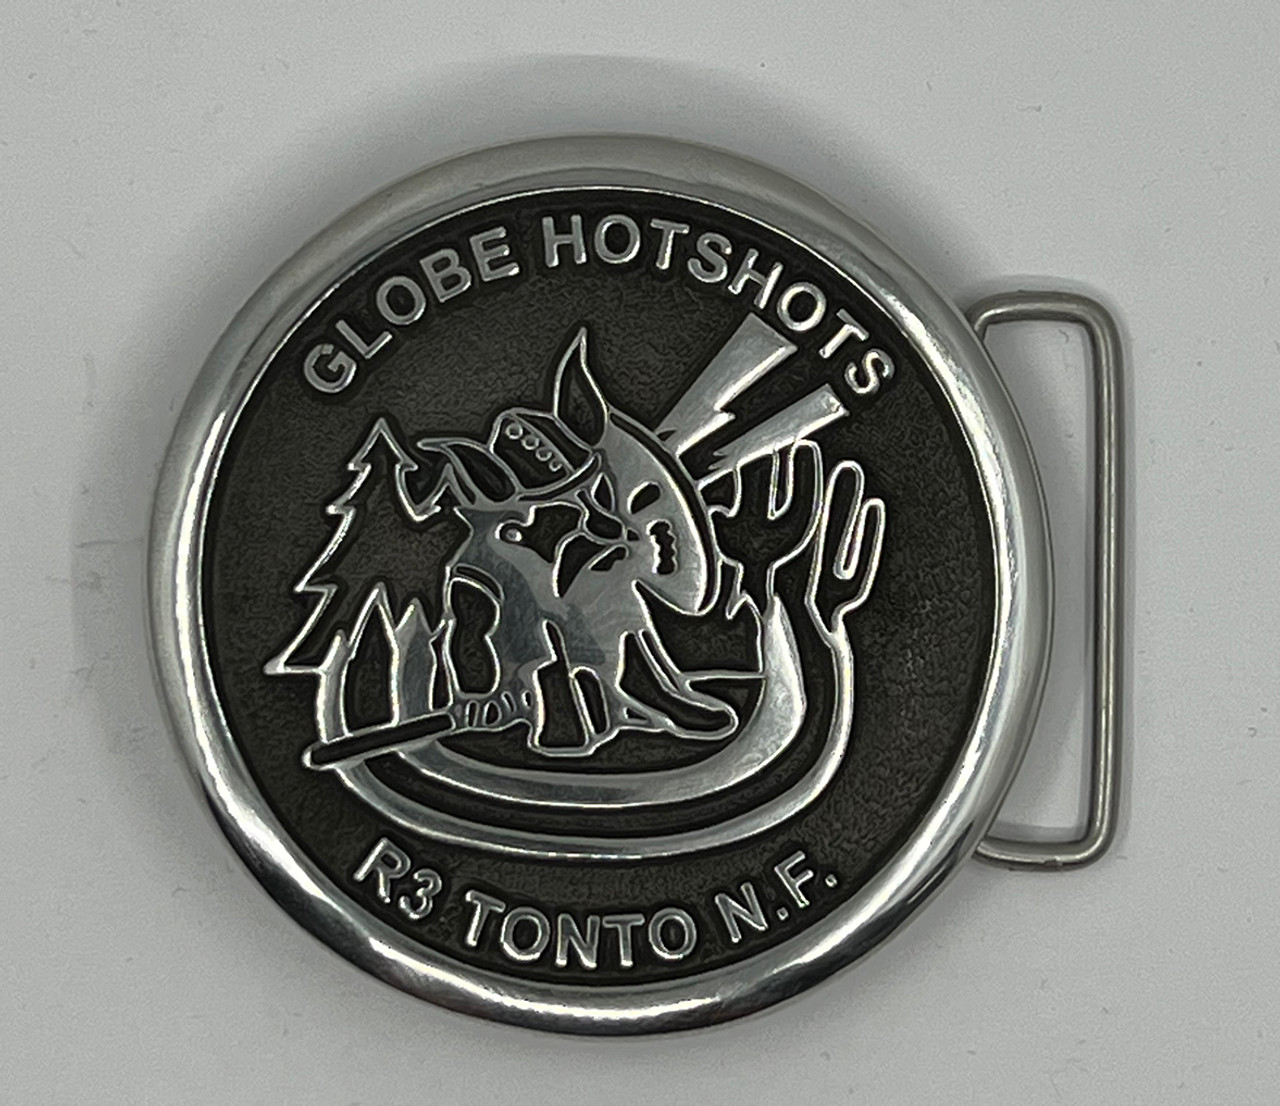 Globe Hotshots R3 Tonto National Forest Buckle (RESTRICTED)